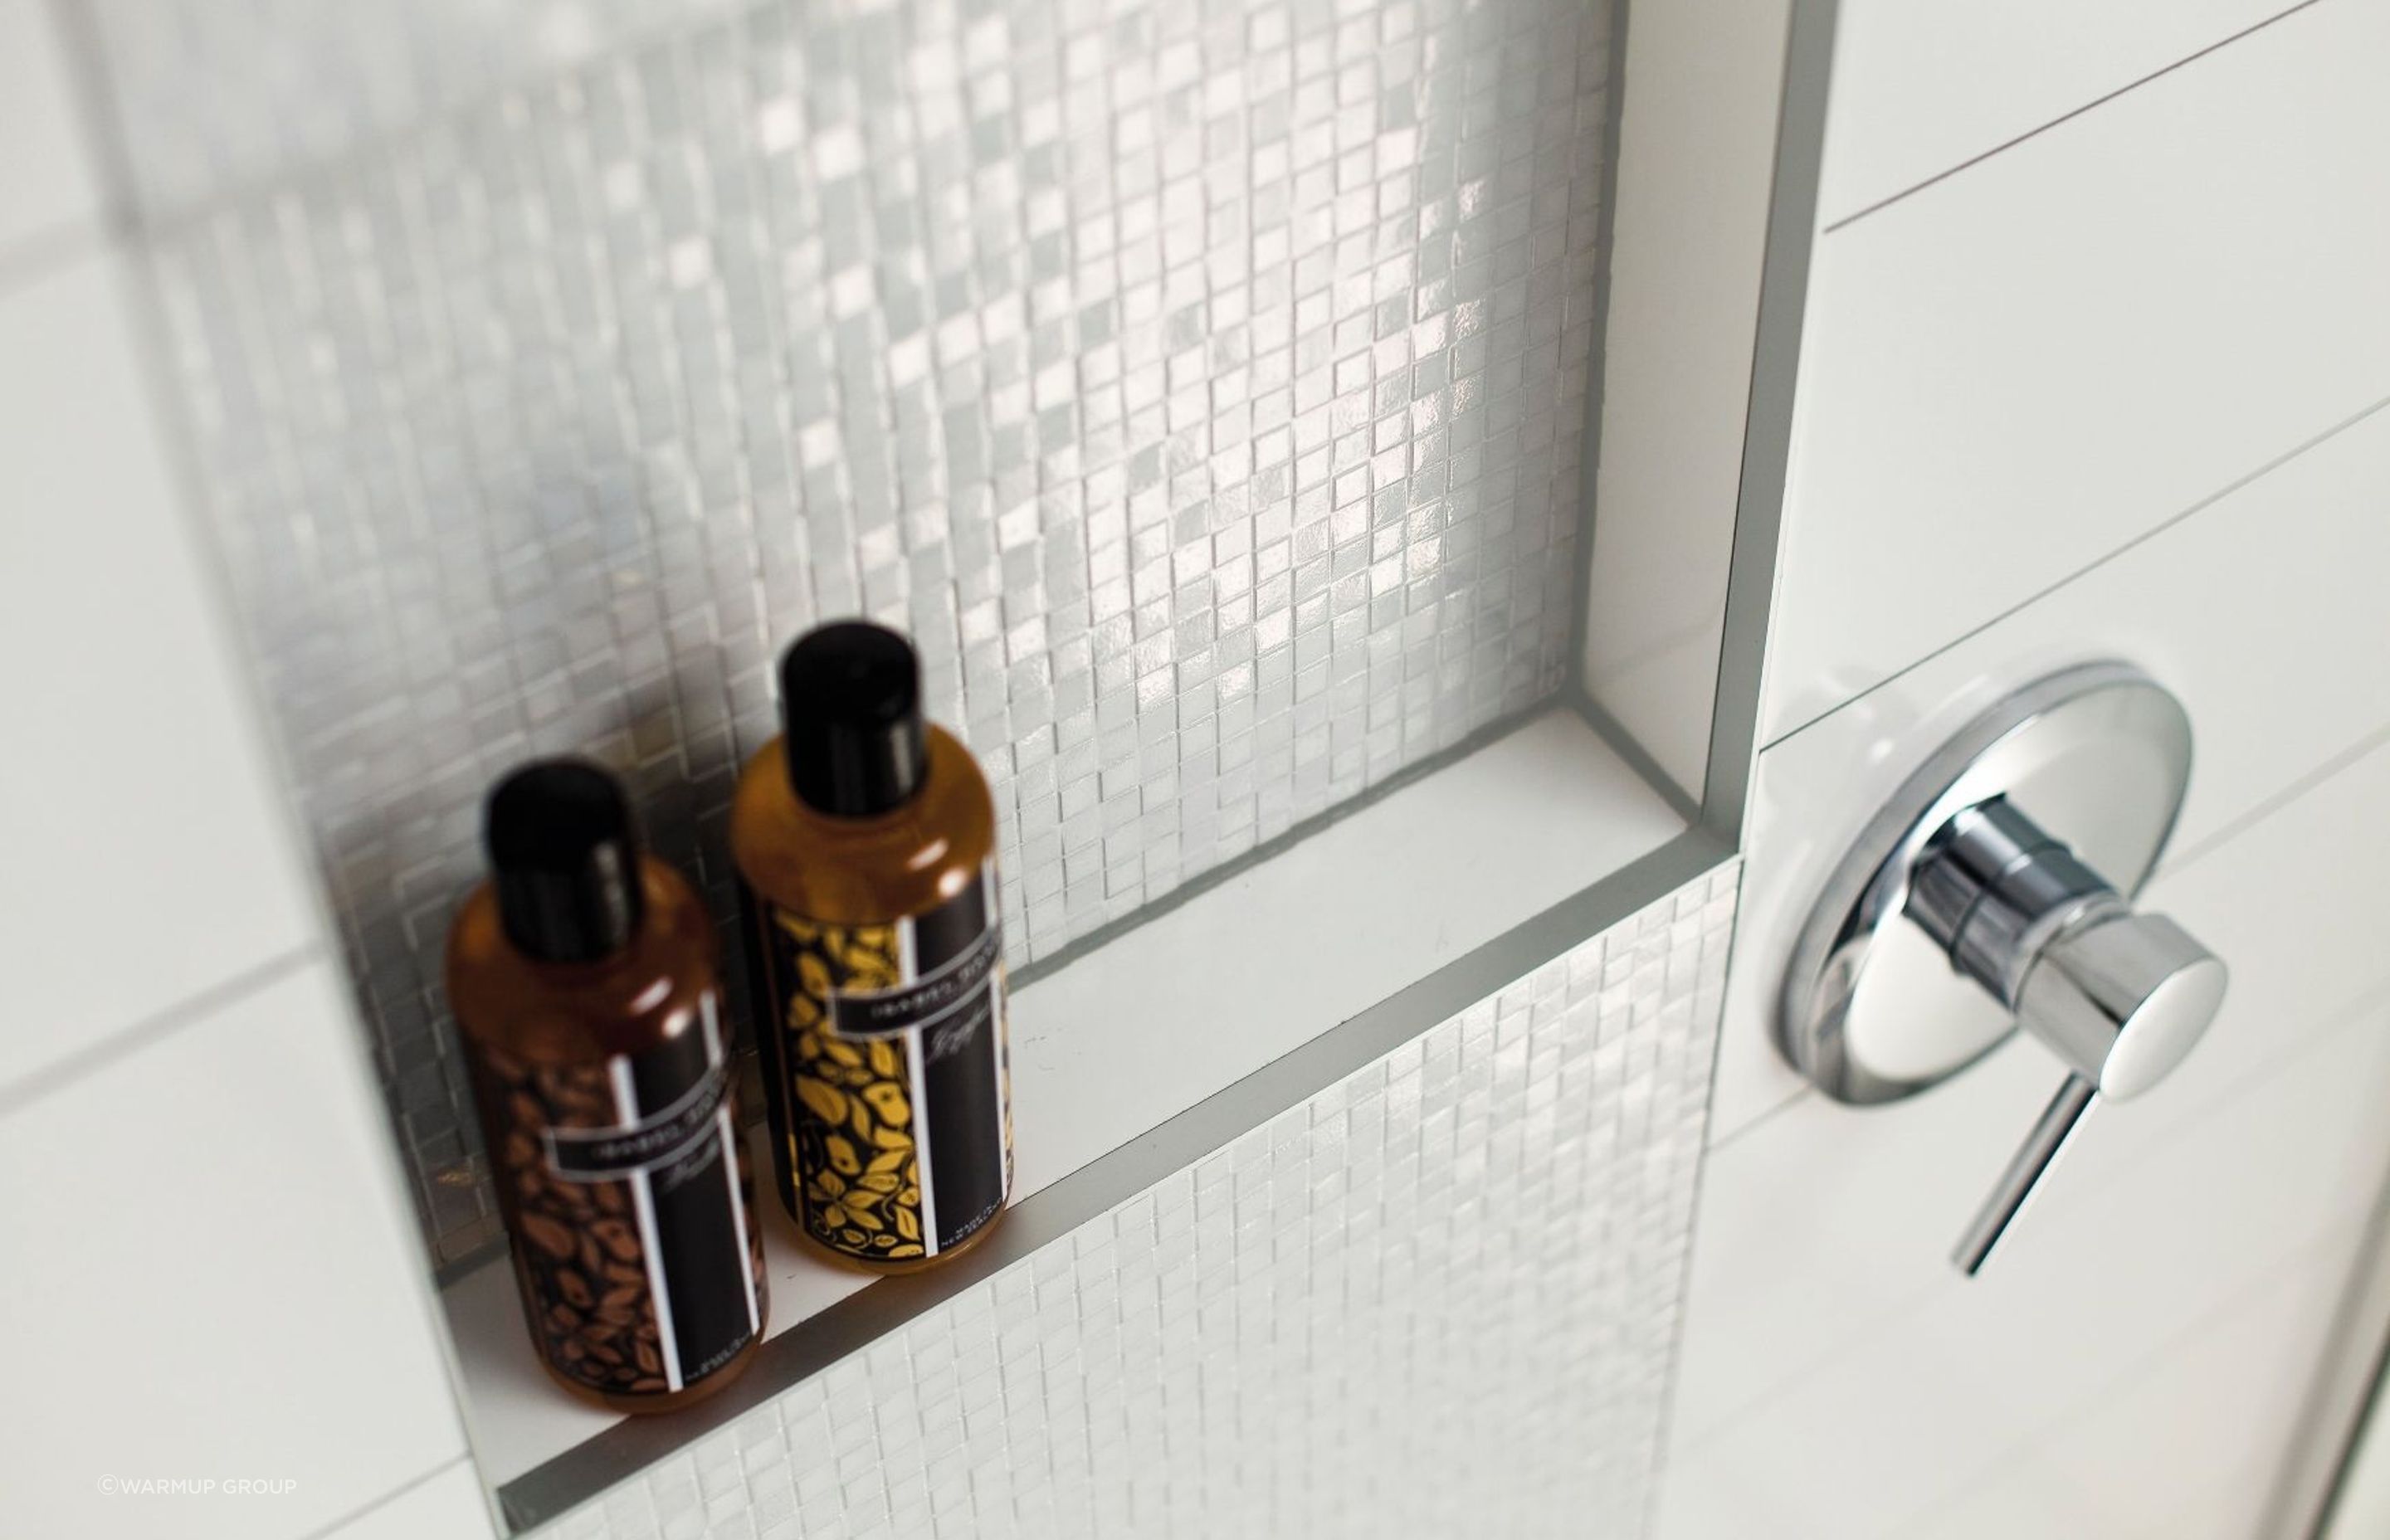 A shower niche like this from Marmox, provides an efficient and tidy way to store your bathroom essentials.